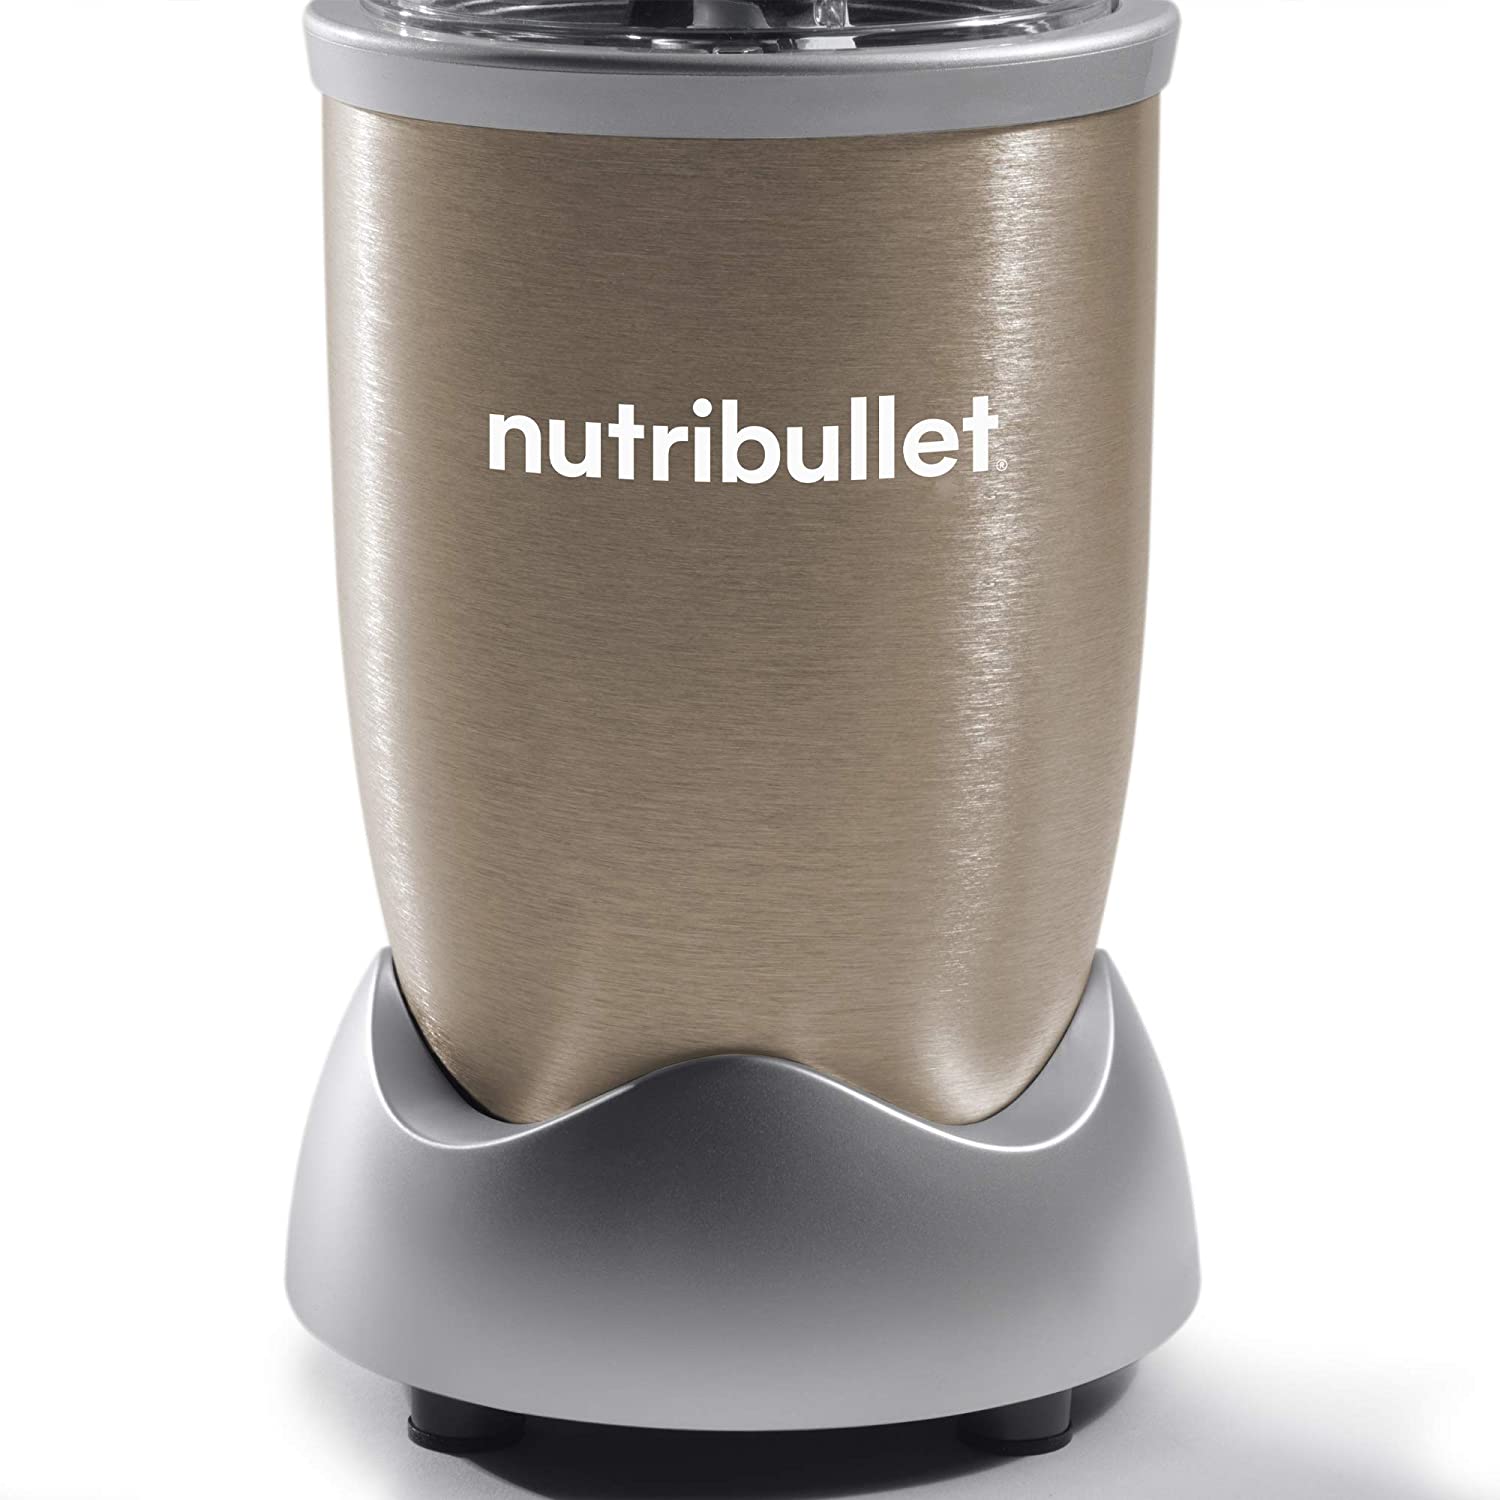 NutriBullet Pro - 13-Piece High-Speed Blender/Mixer System with Hardcover  Recipe Book Included (900 Watts) Champagne, Standard & 900 Watt/Sport Cross